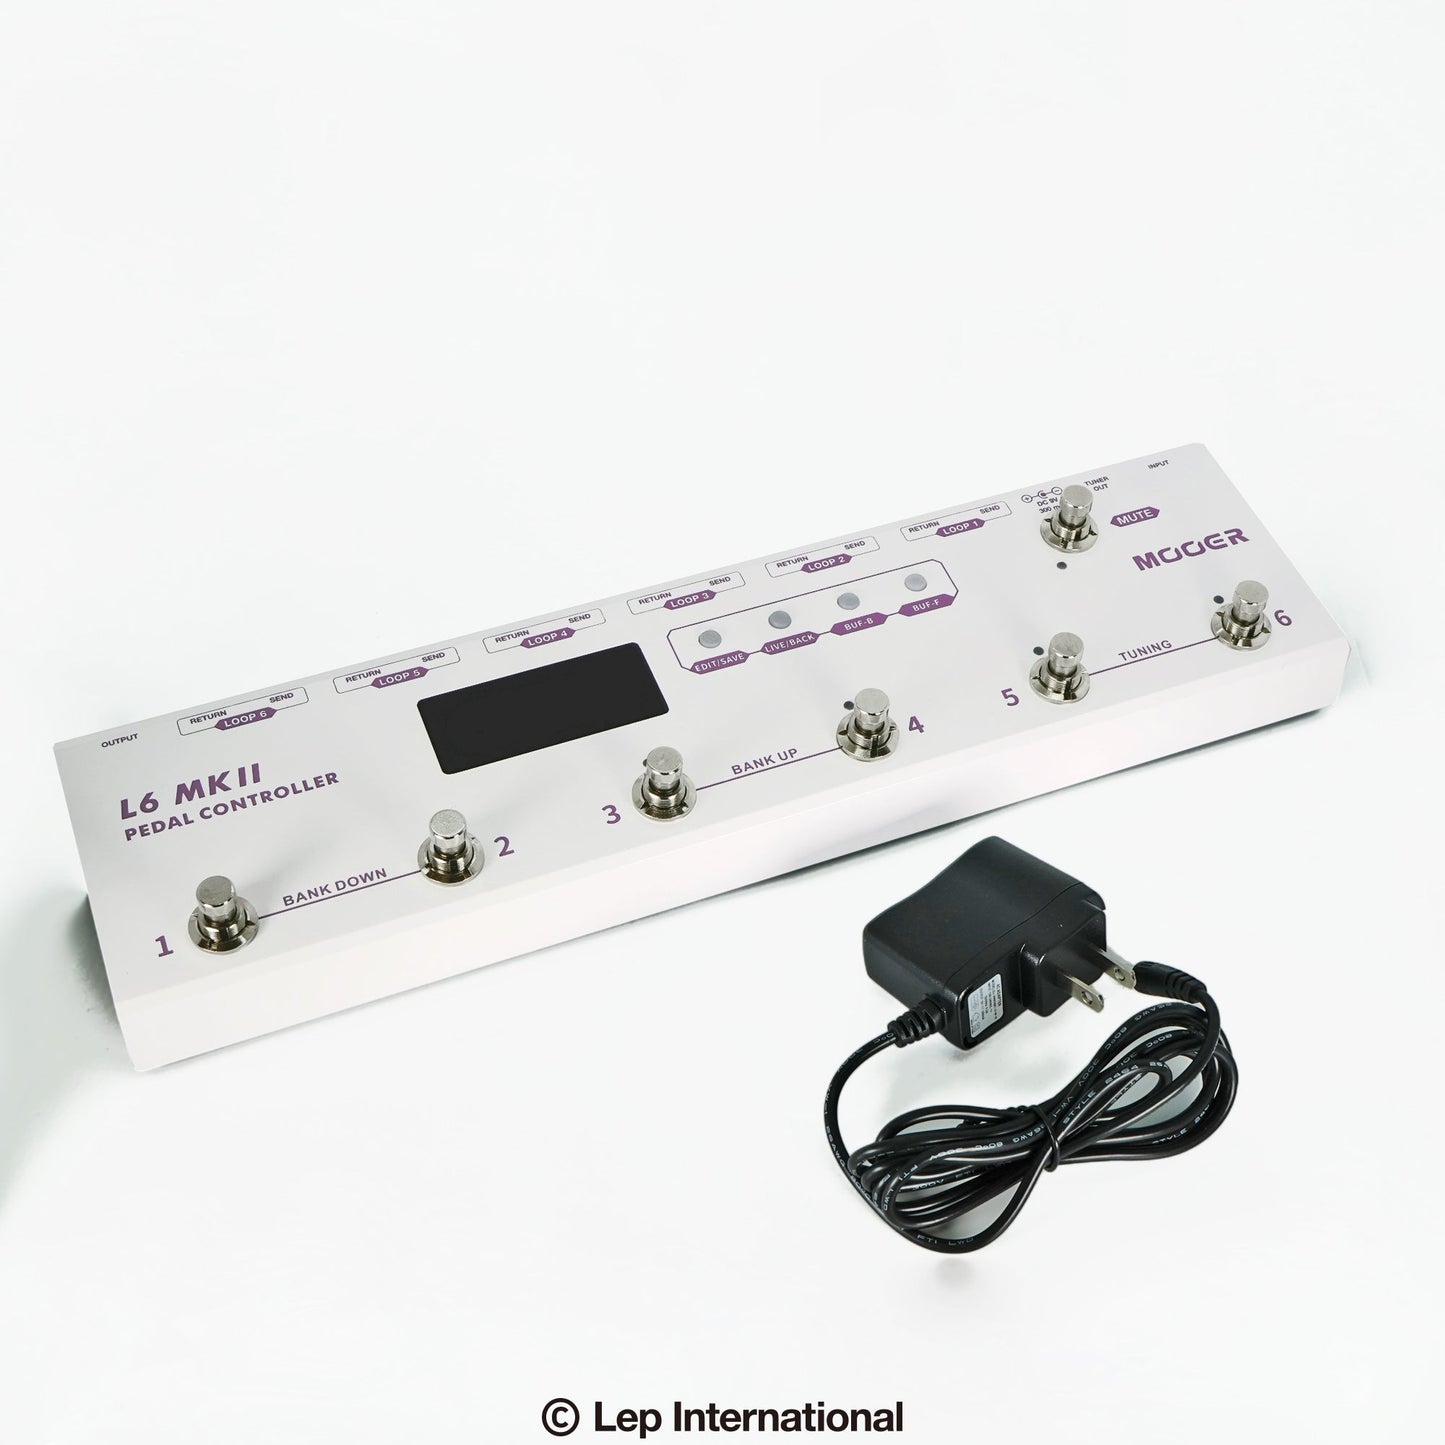 Mooer/Pedal Controller L6 MkII